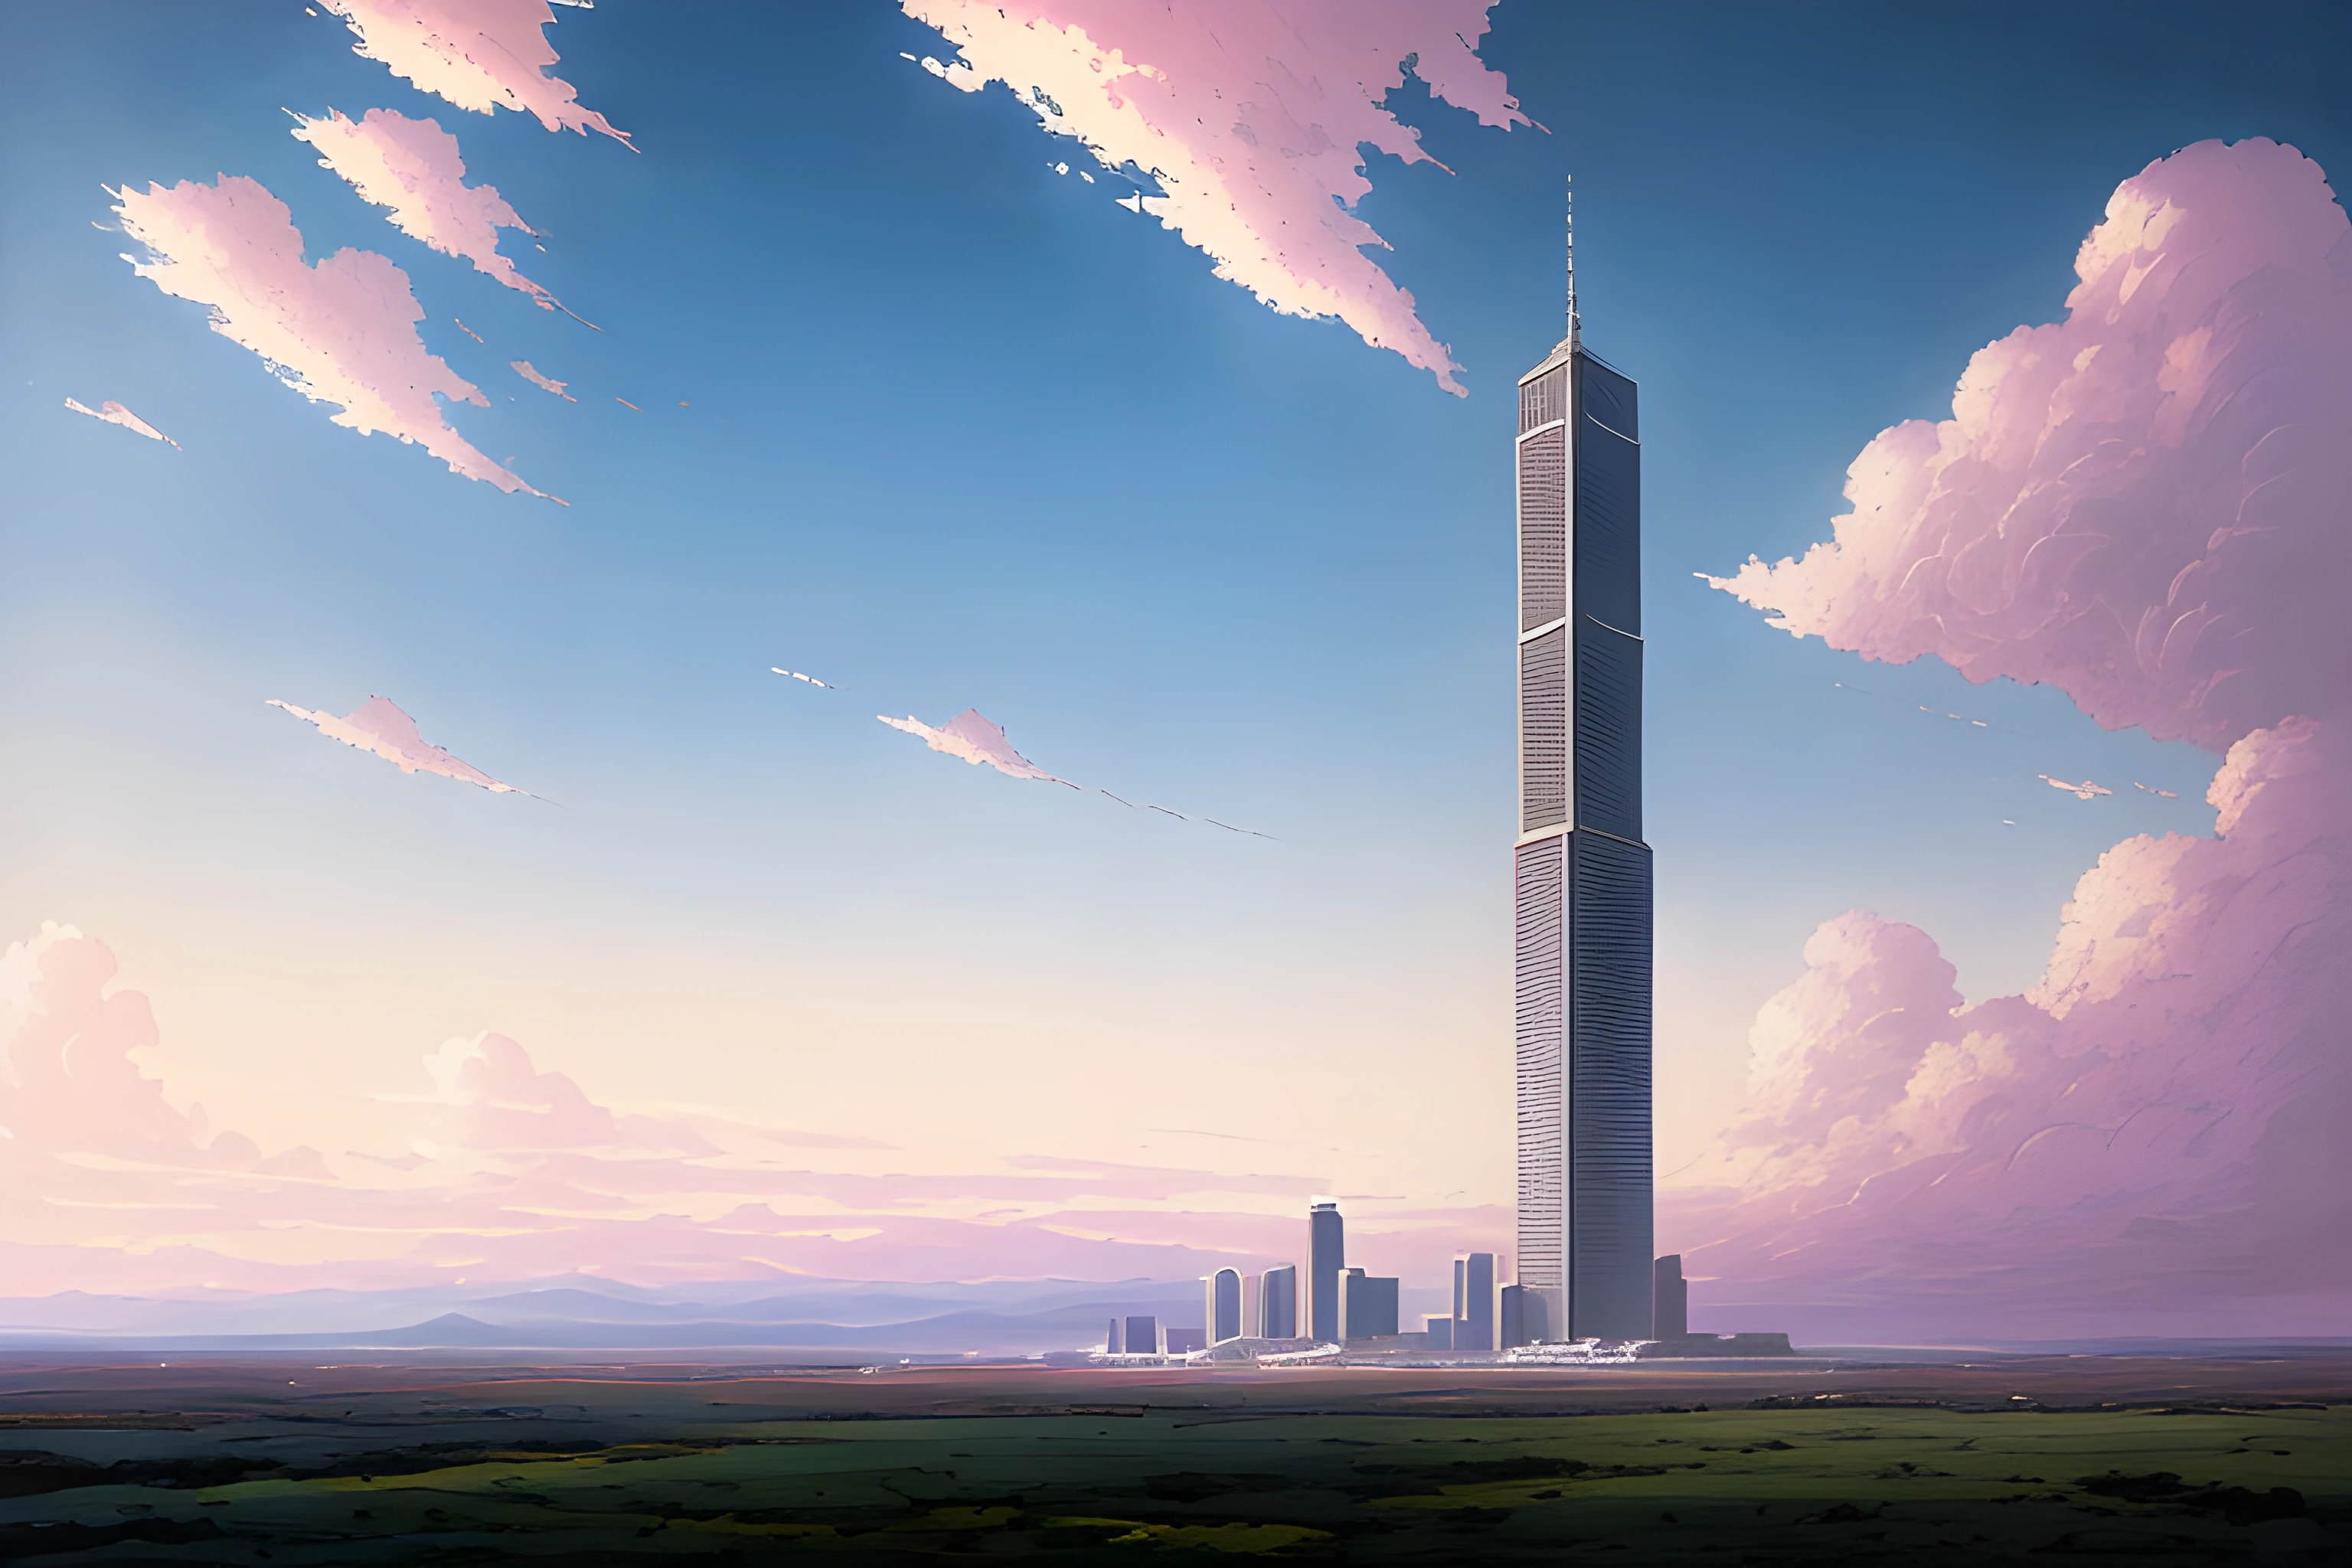 anime - style painting of a tall skyscraper with a sky background